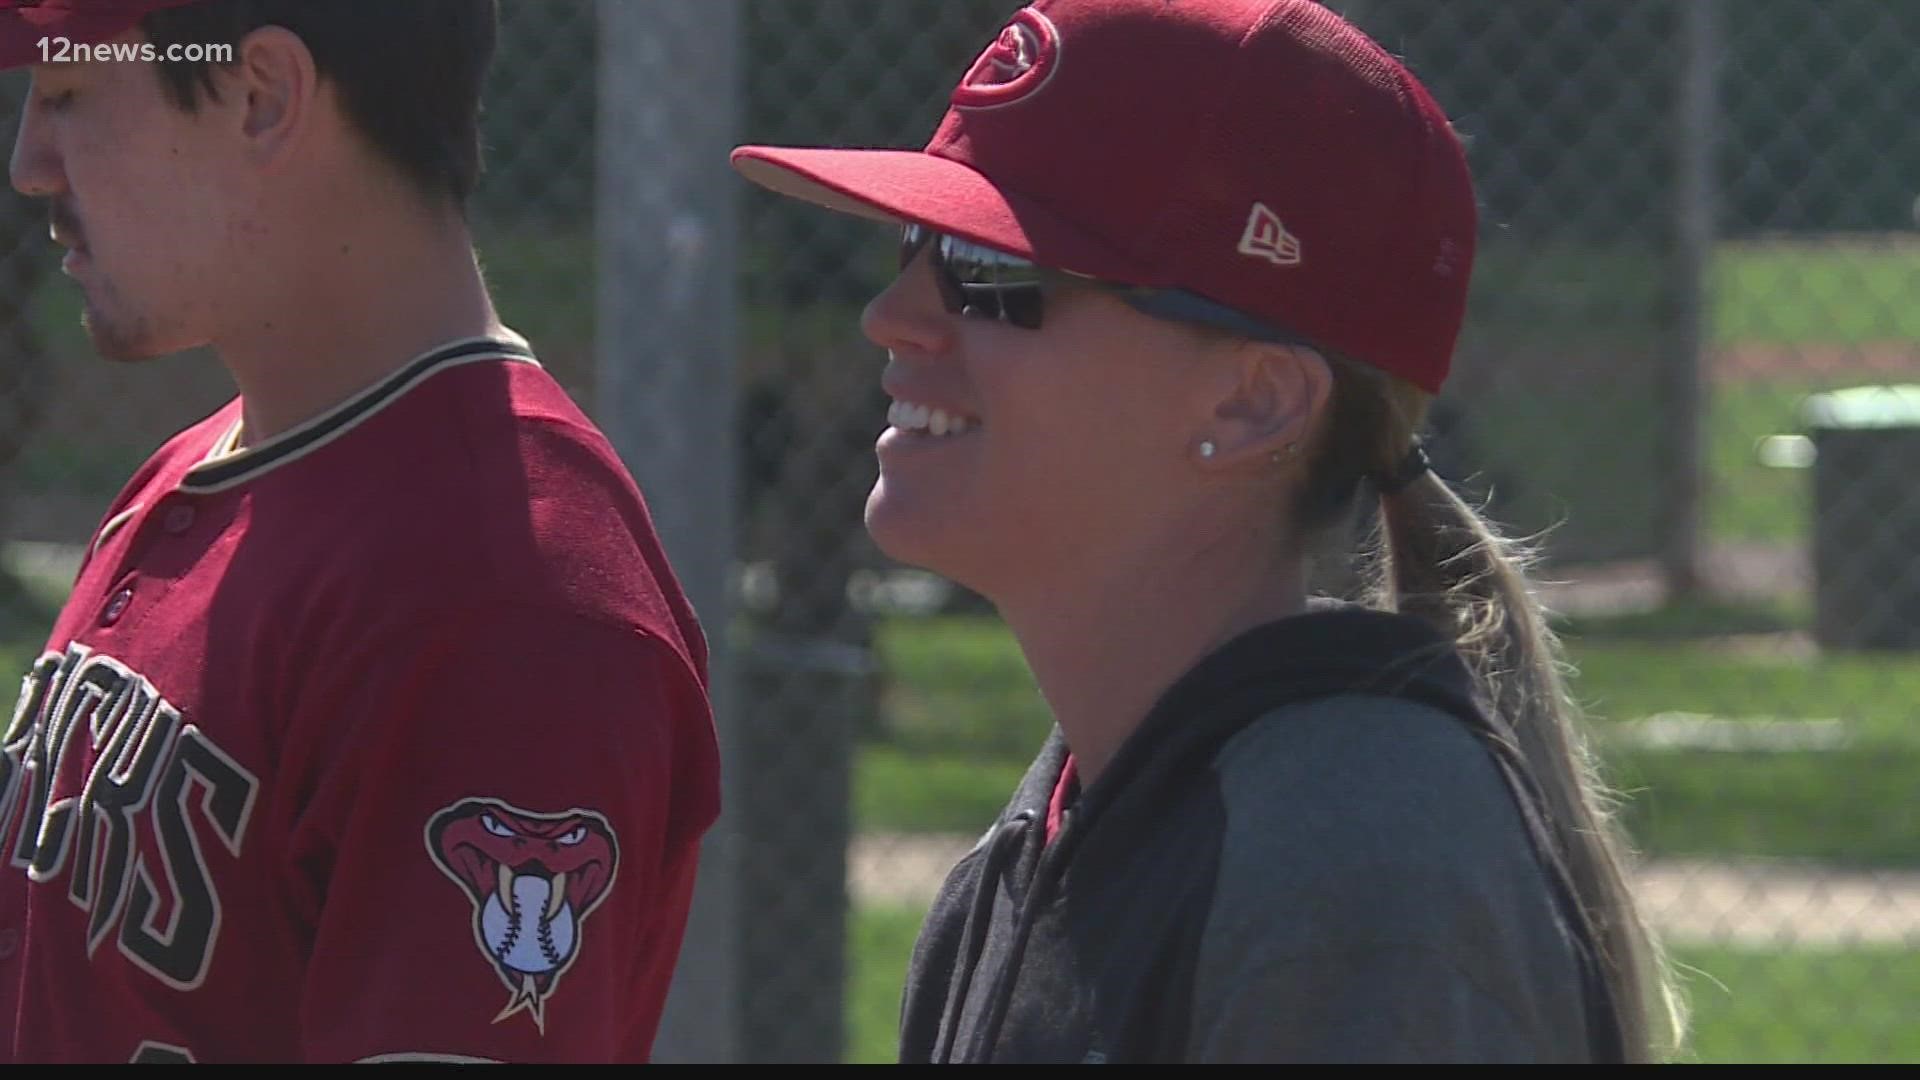 Ronnie Gajownik is trailblazing the sport of baseball in her second year with the Diamondbacks. She coaches in Arizona's minor league system.